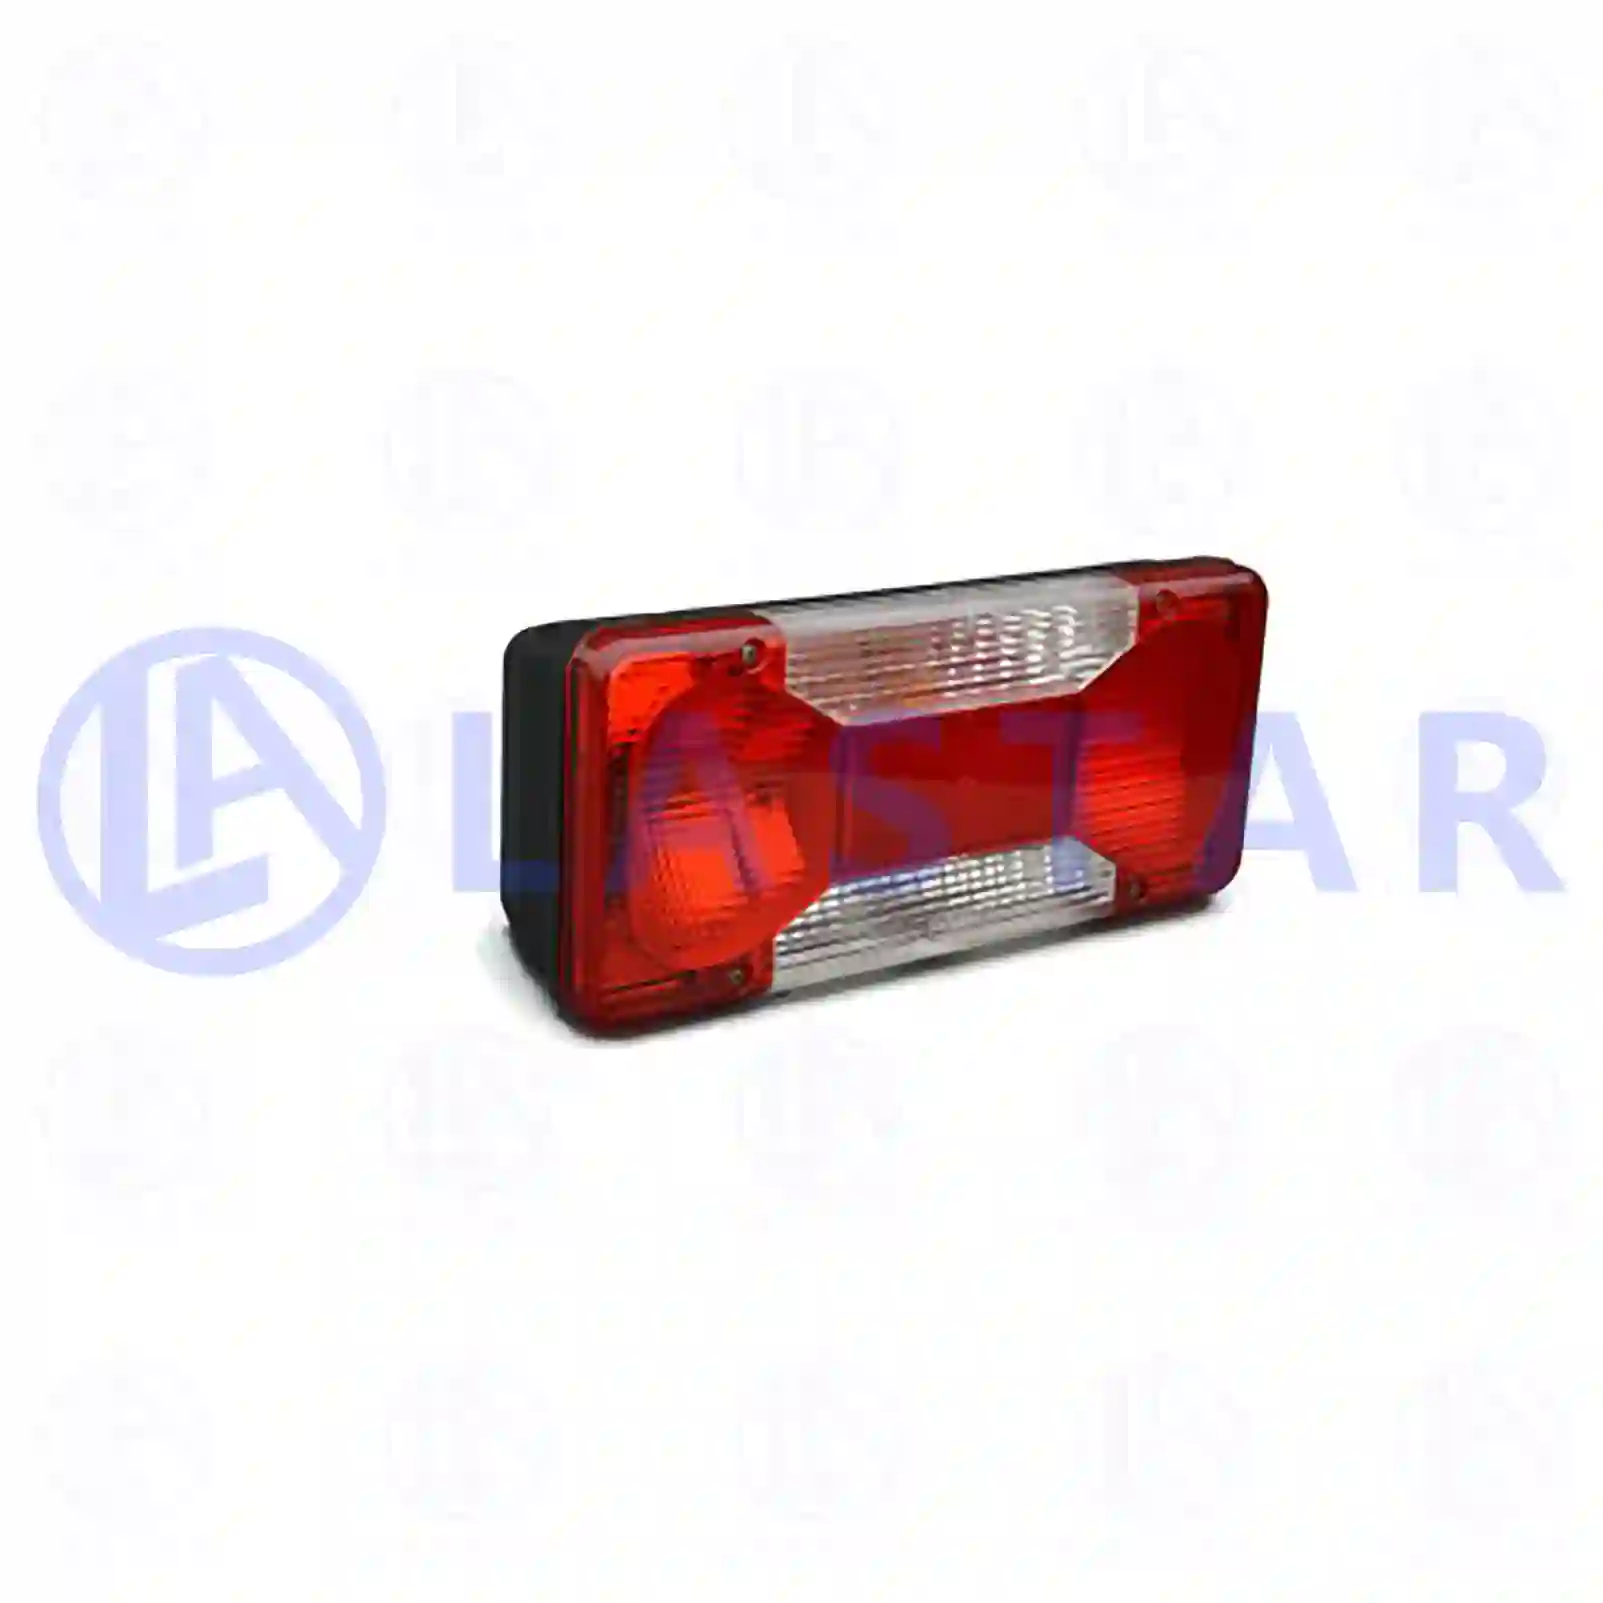 Tail lamp, right, 77712982, 5801351224, 5801631433, 69500026, ||  77712982 Lastar Spare Part | Truck Spare Parts, Auotomotive Spare Parts Tail lamp, right, 77712982, 5801351224, 5801631433, 69500026, ||  77712982 Lastar Spare Part | Truck Spare Parts, Auotomotive Spare Parts